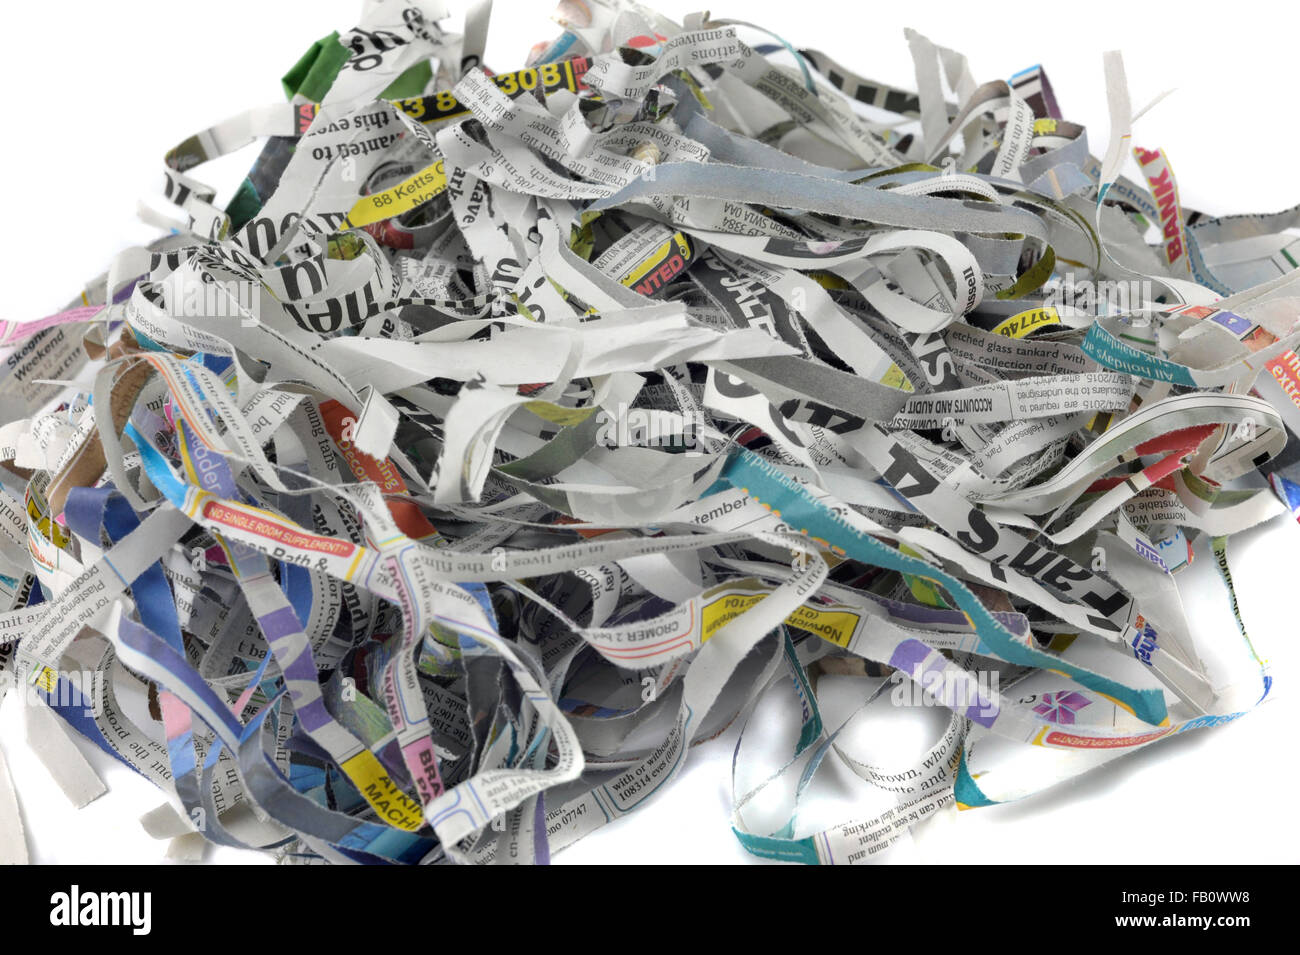 Shredded newspaper for re-use as packing material, animal bedding, garden mulch and composting. Stock Photo